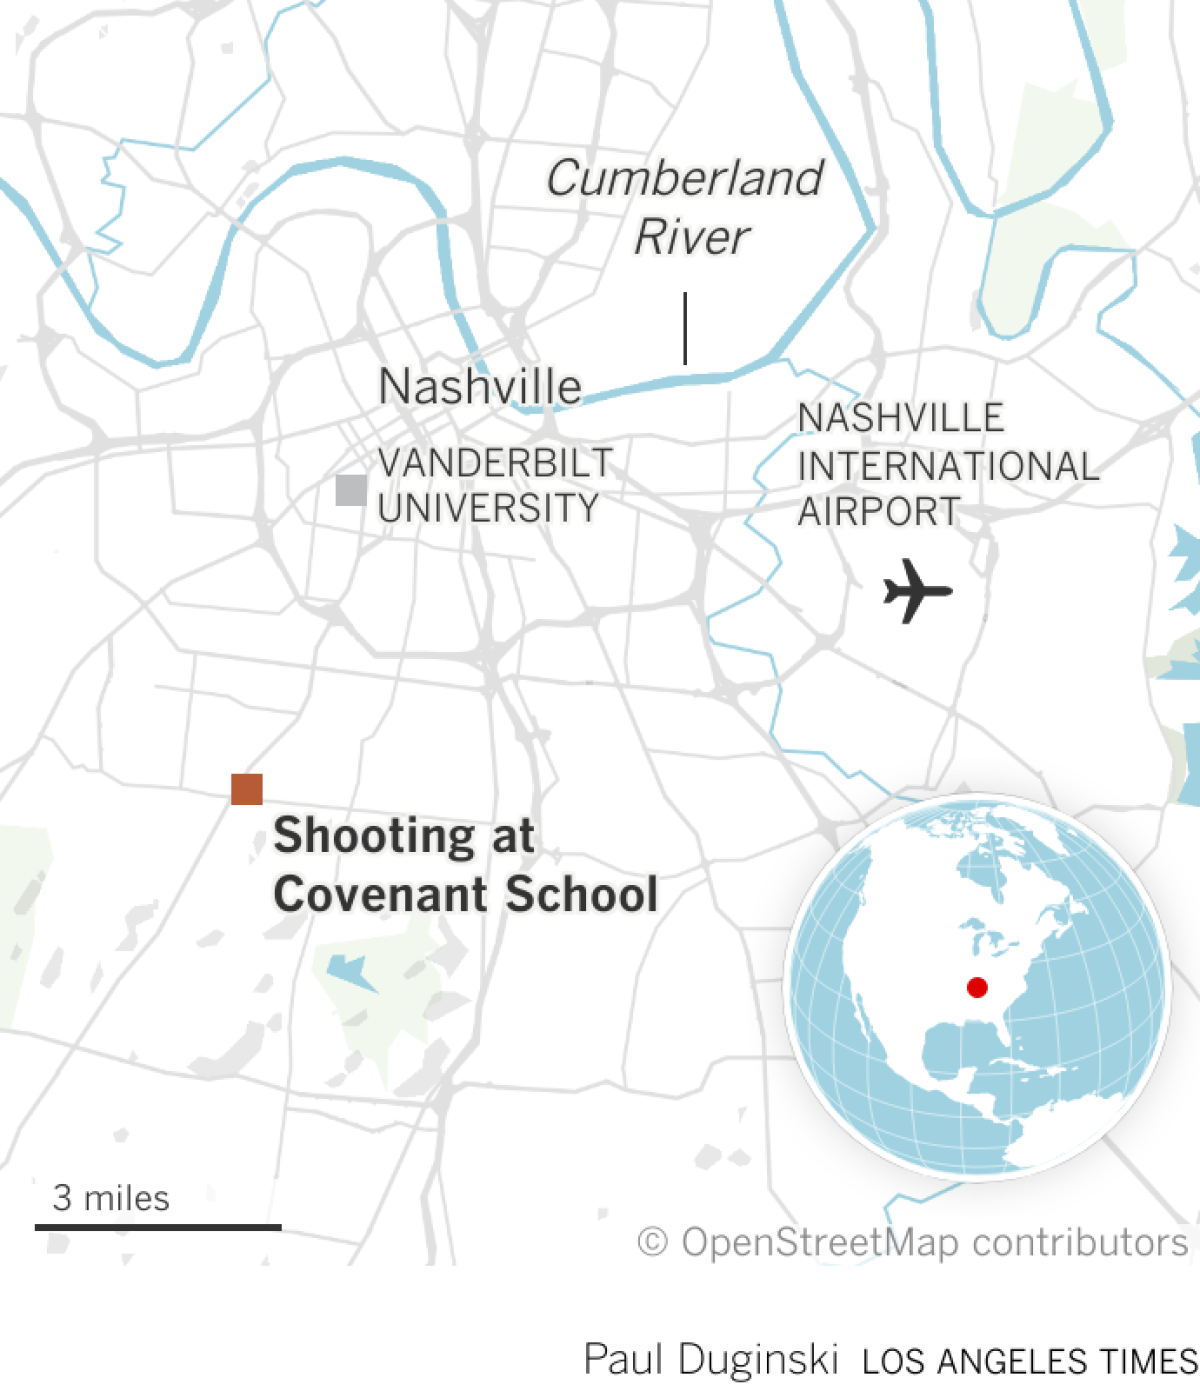 Locator of Covenant School, site of a shooting in Nashville, Tenn.